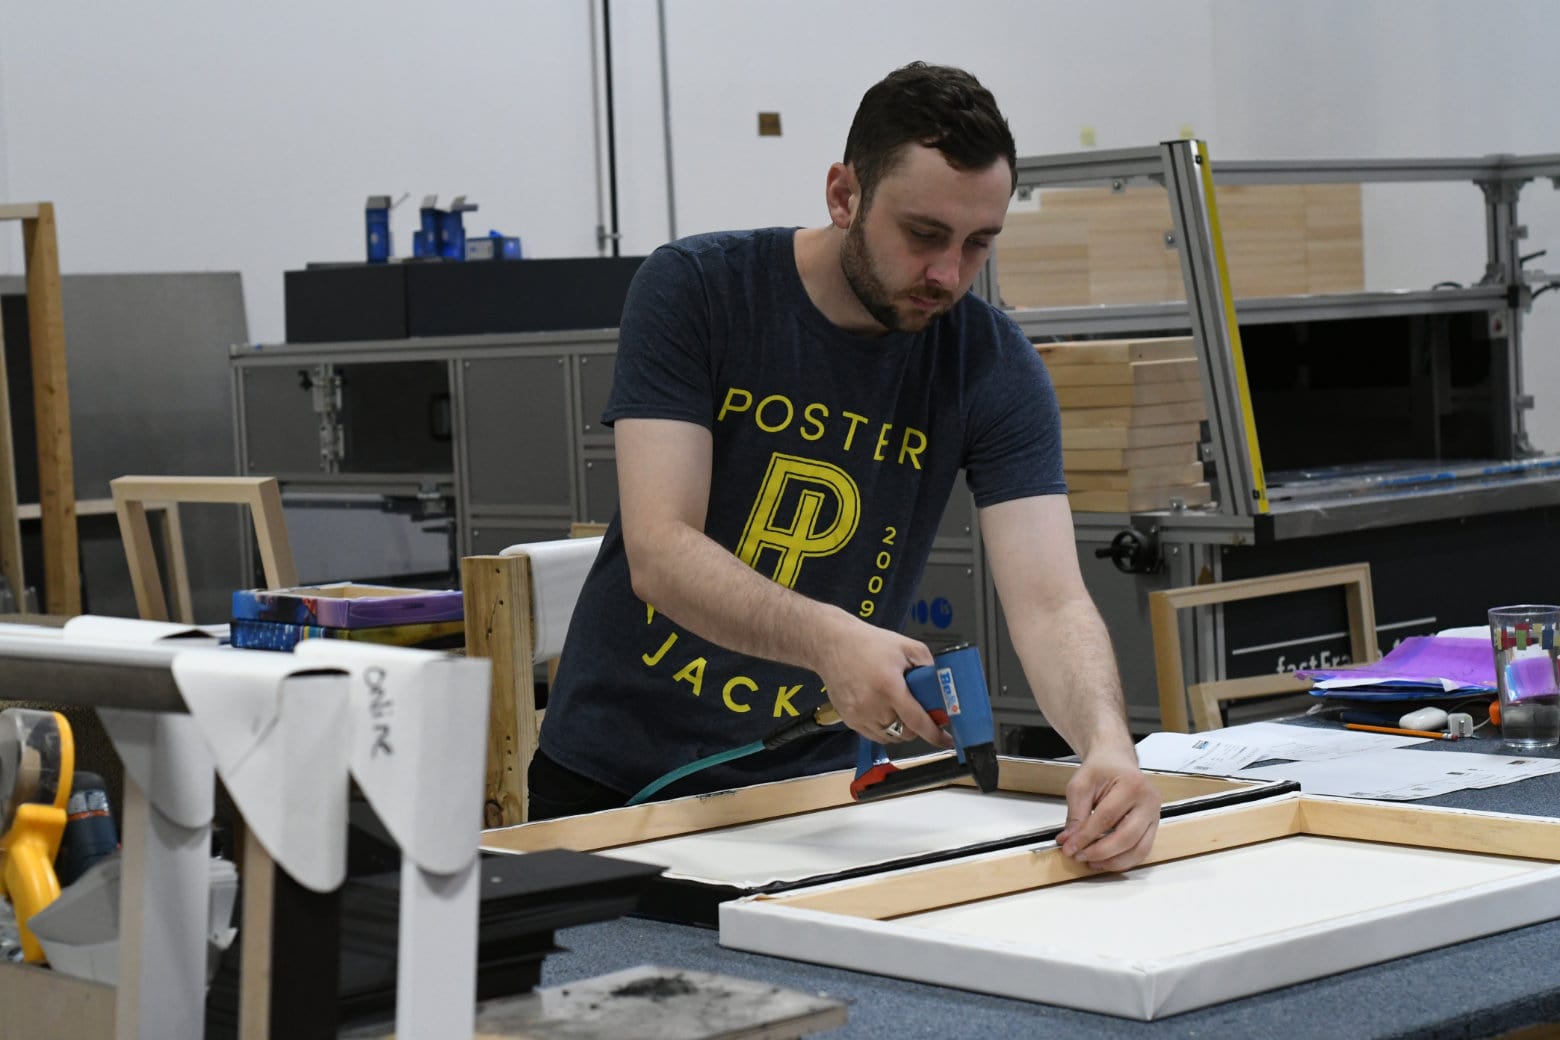 Making high quality photo prints in Posterjack's print shop in Toronto, Ontario